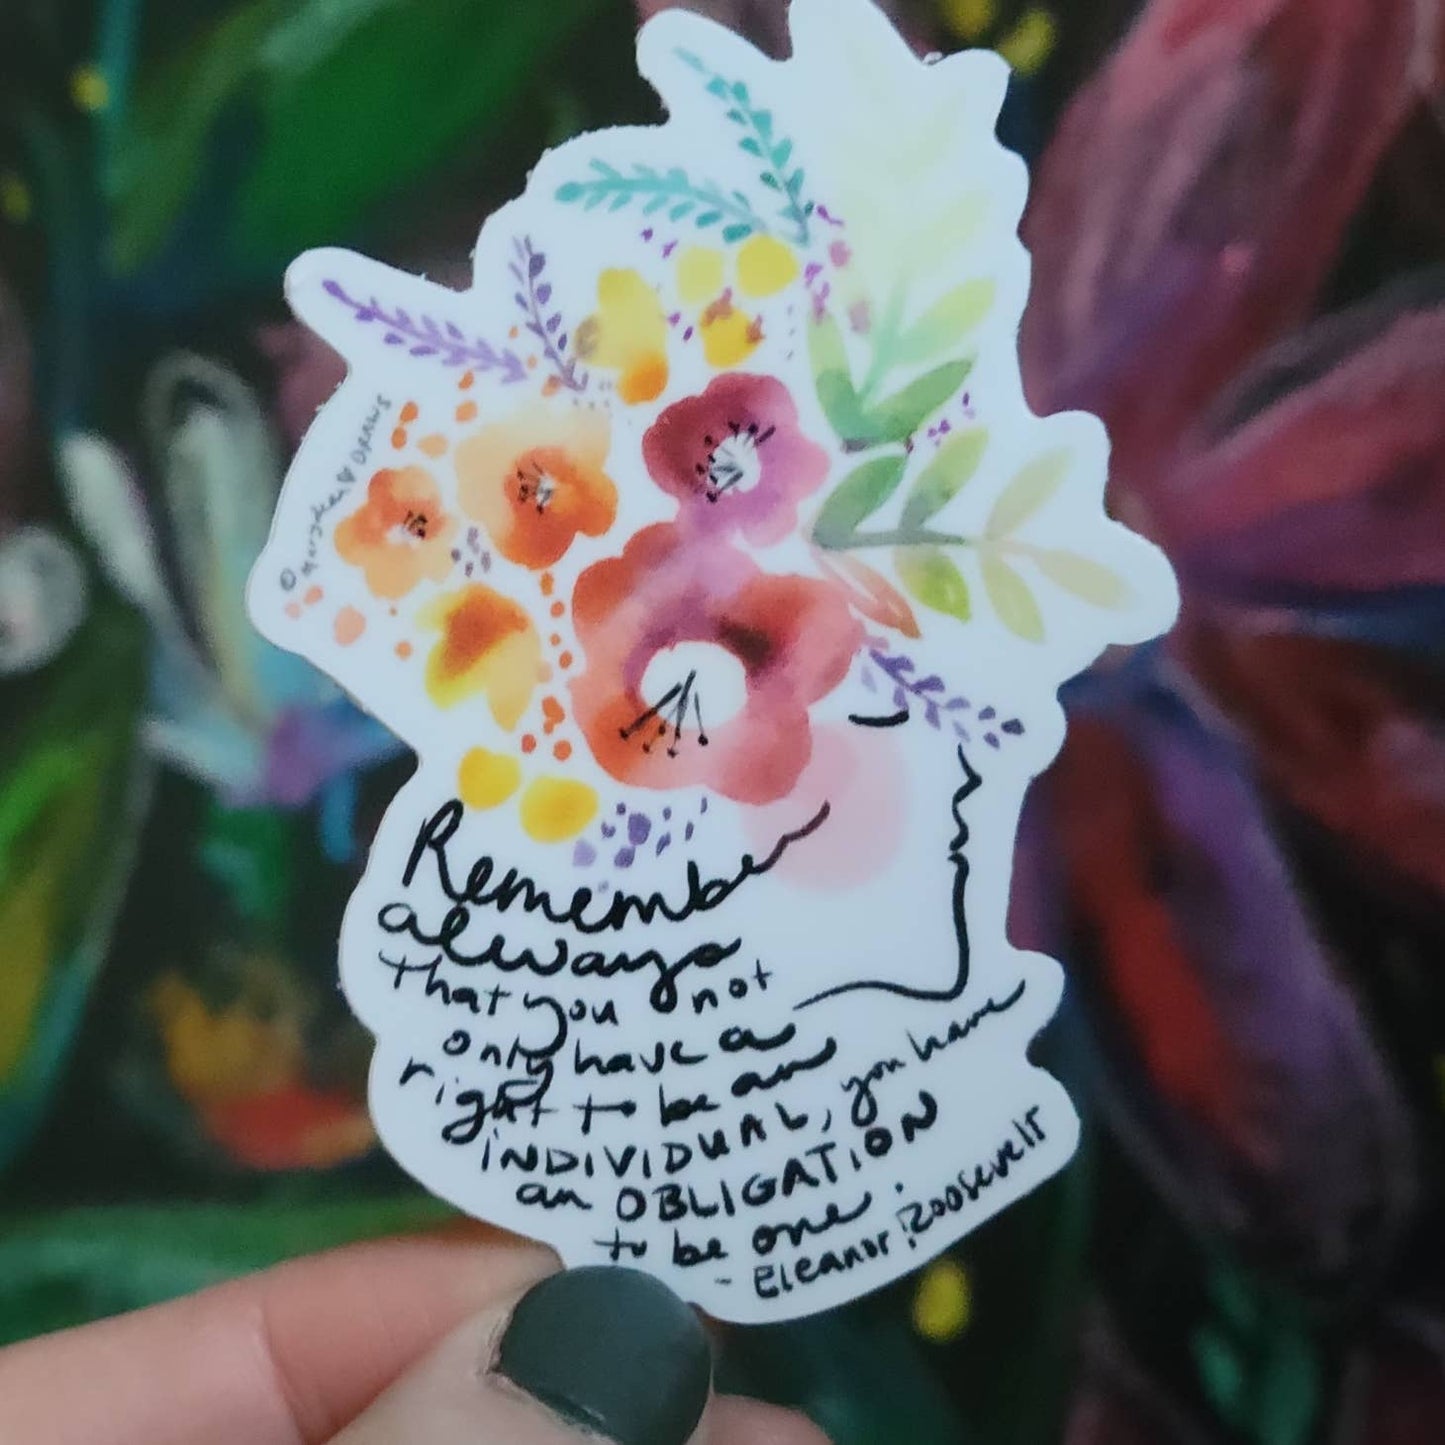 Marydean Draws Sticker - "Be an Individual" Eleanor Roosevelt Quote